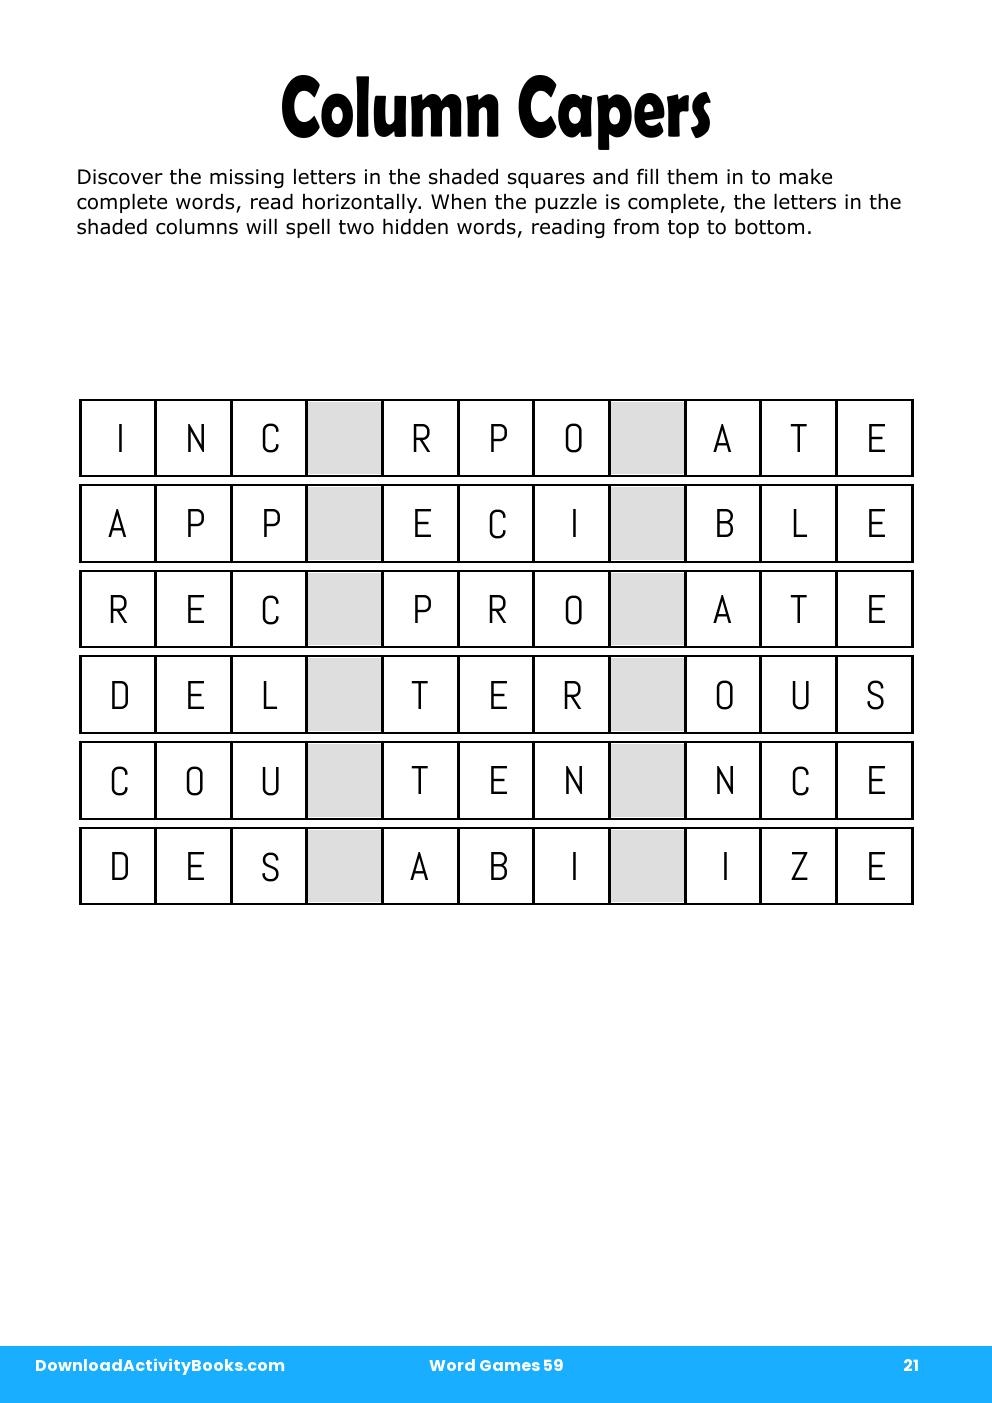 Column Capers in Word Games 59